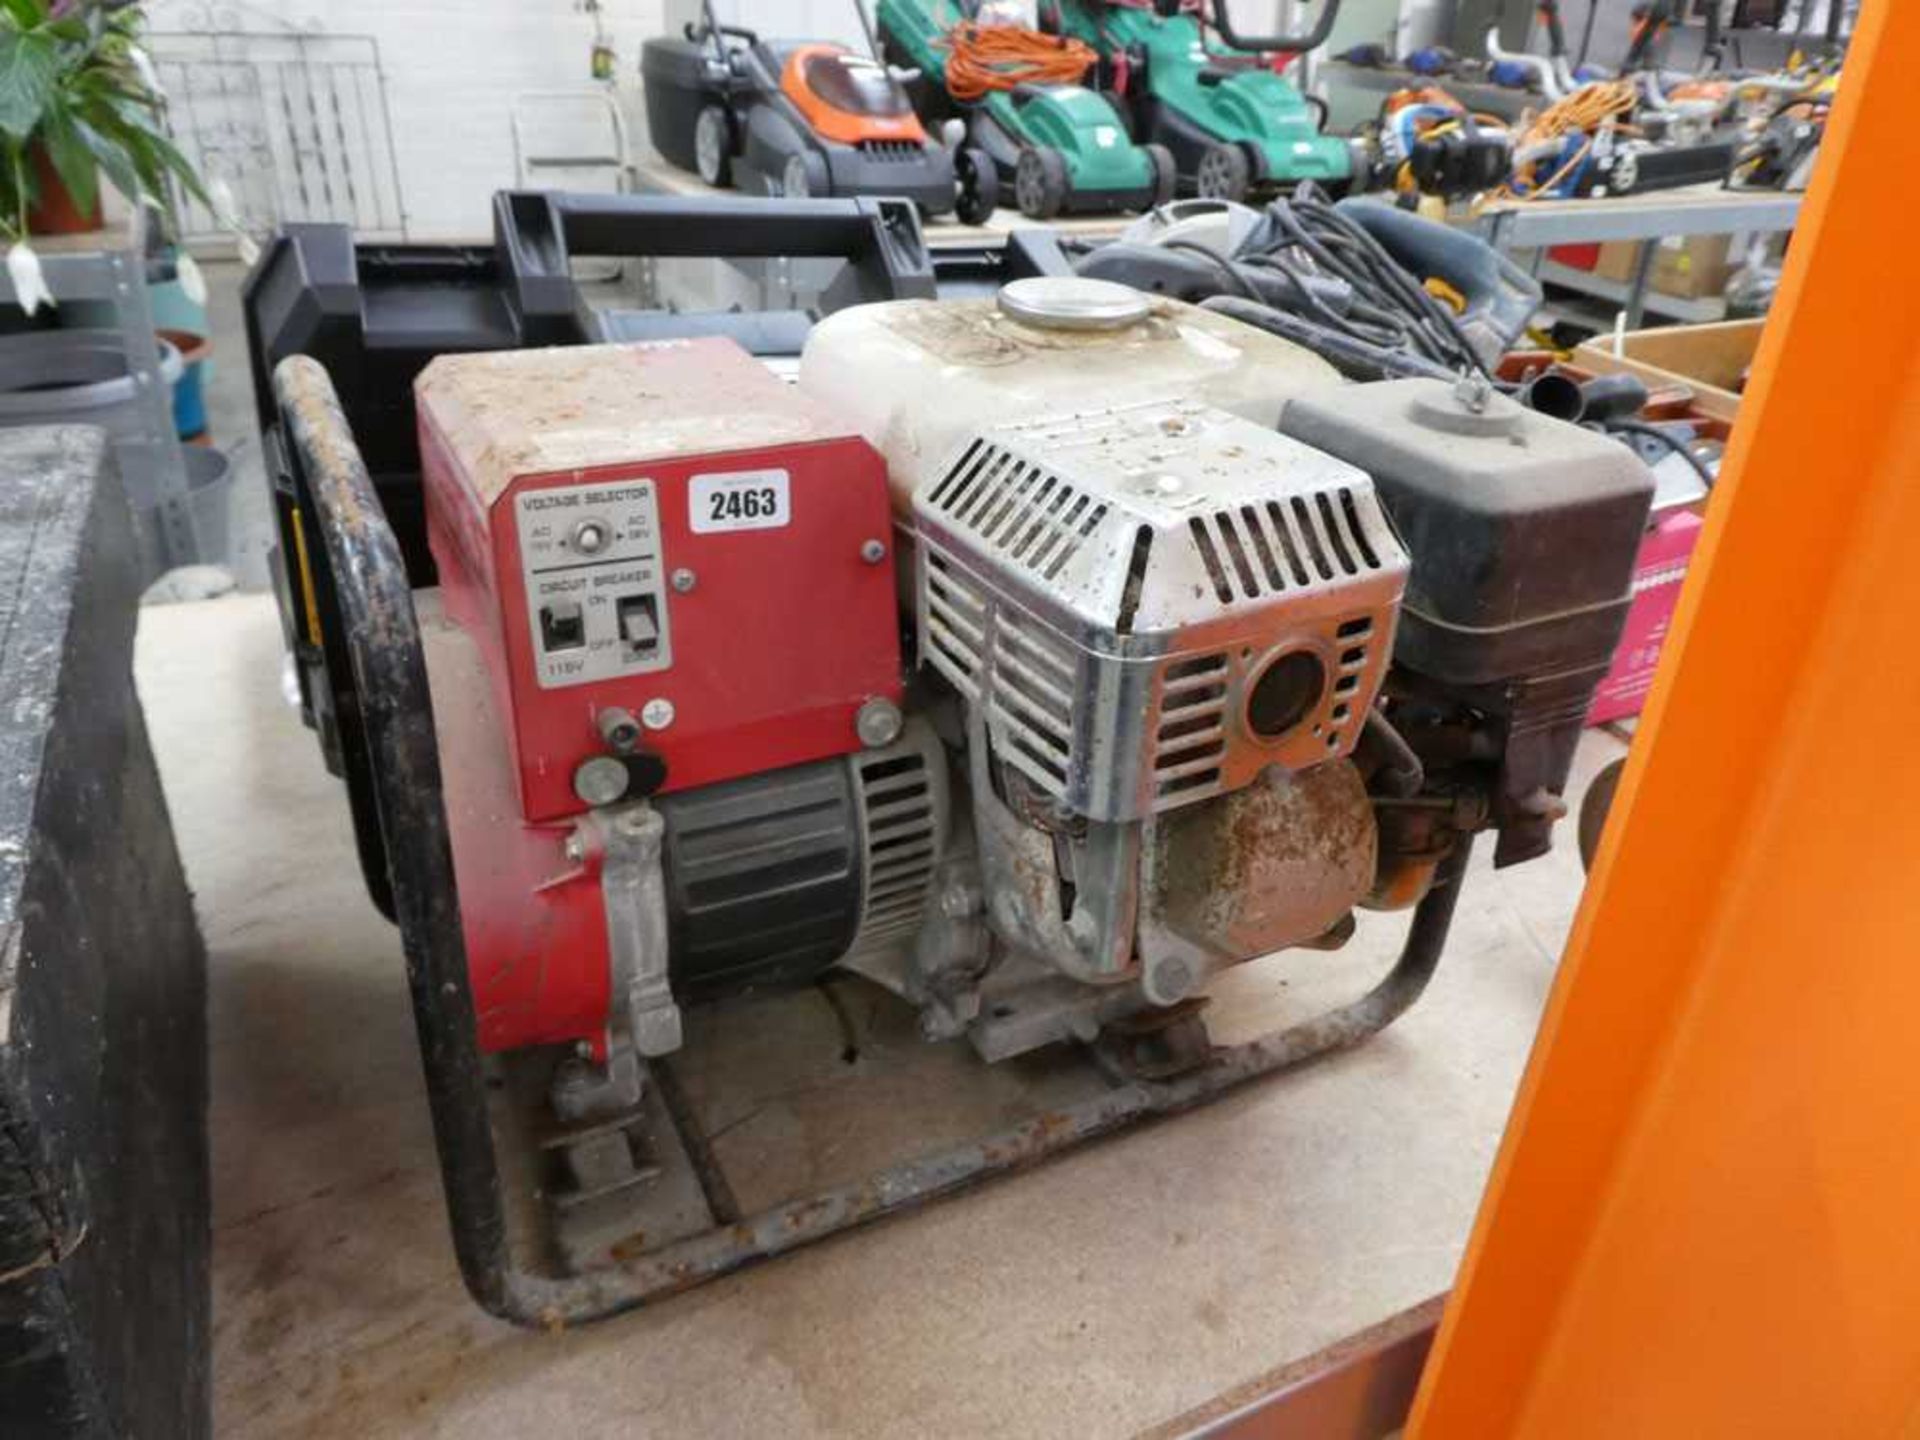 Honda petrol generator with 2 outlets